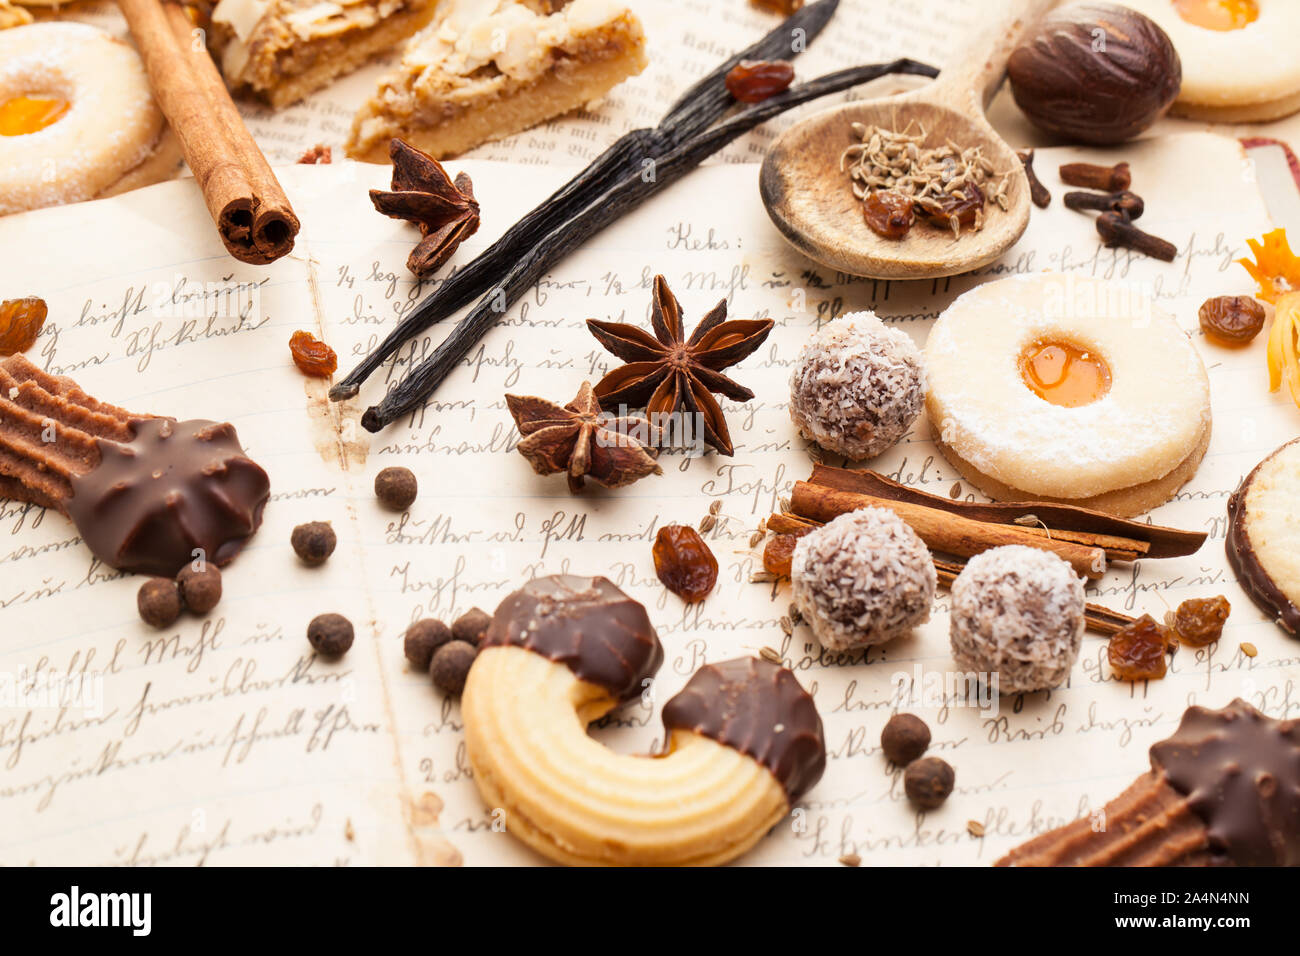 Biscuits and spices lying on a old cookbook Stock Photo